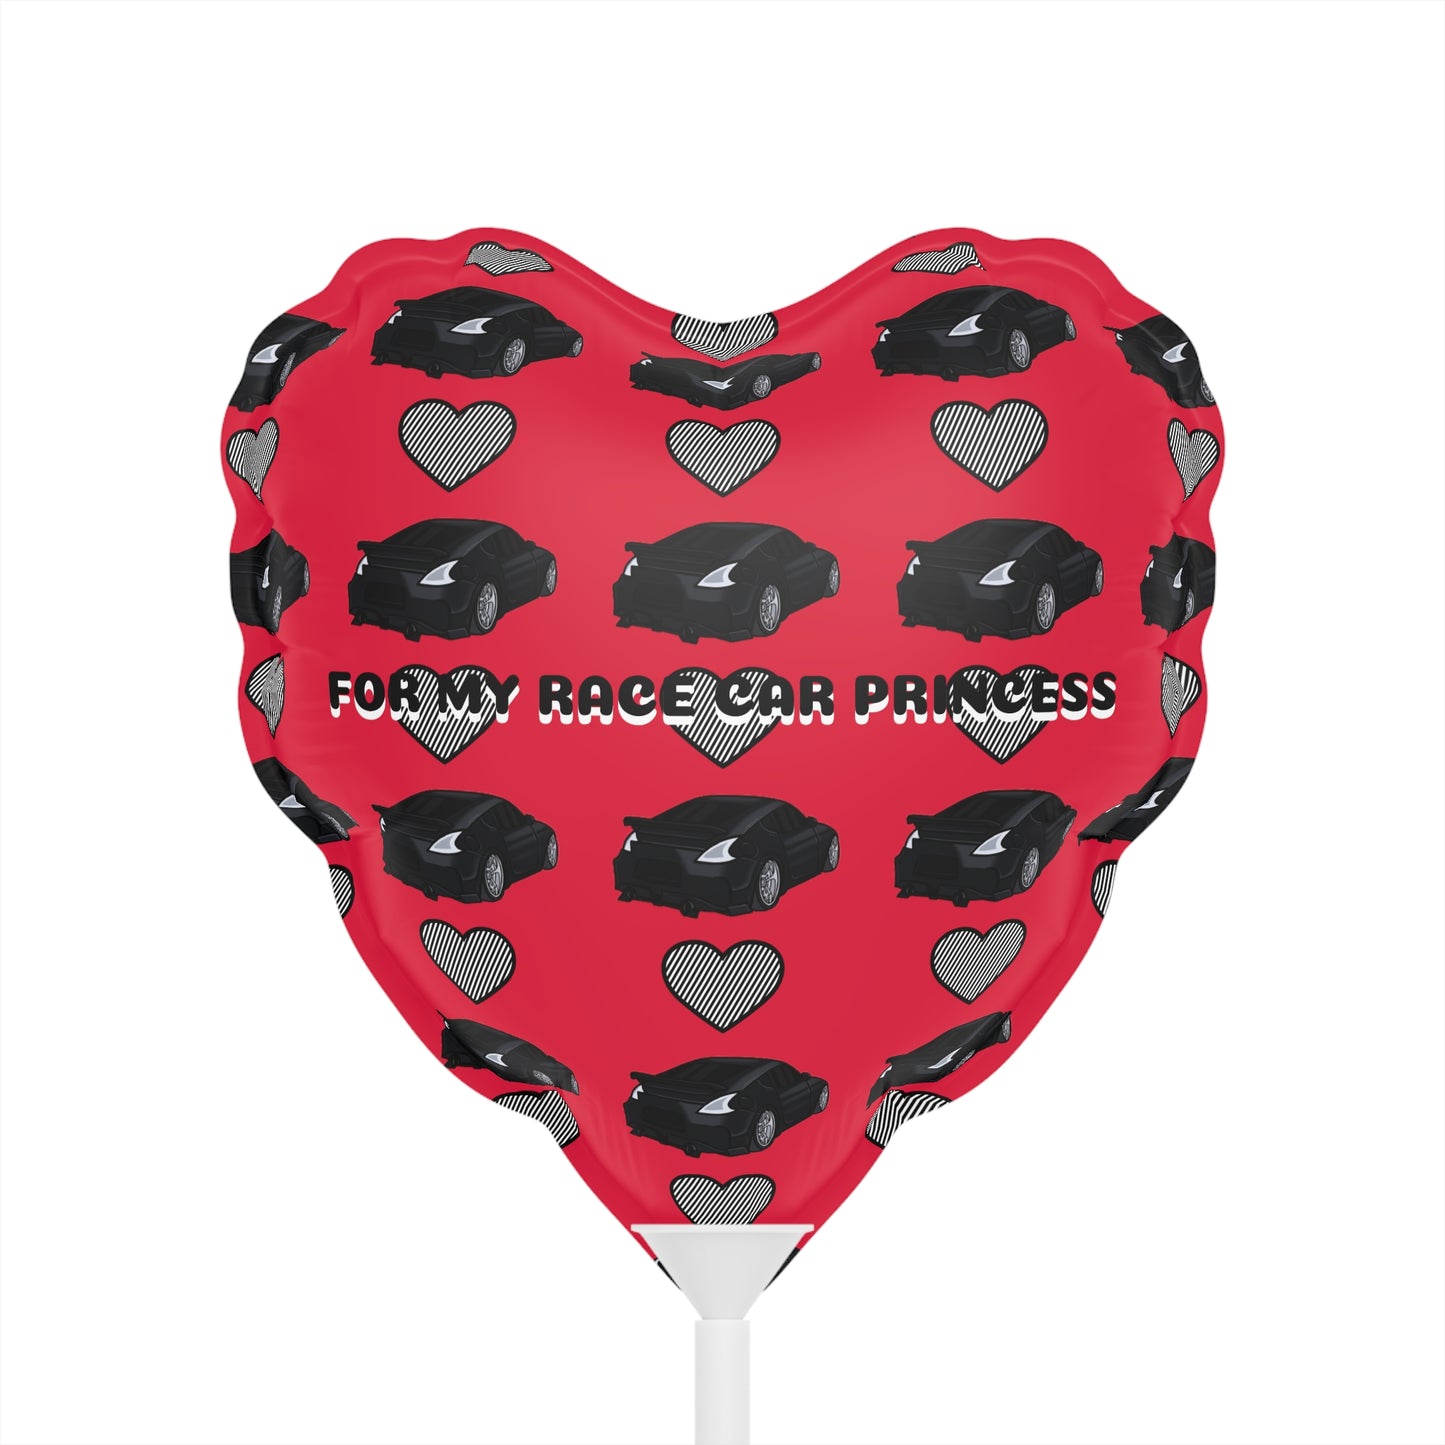 370Z Red Heart Balloon (Round and Heart-shaped), 6"